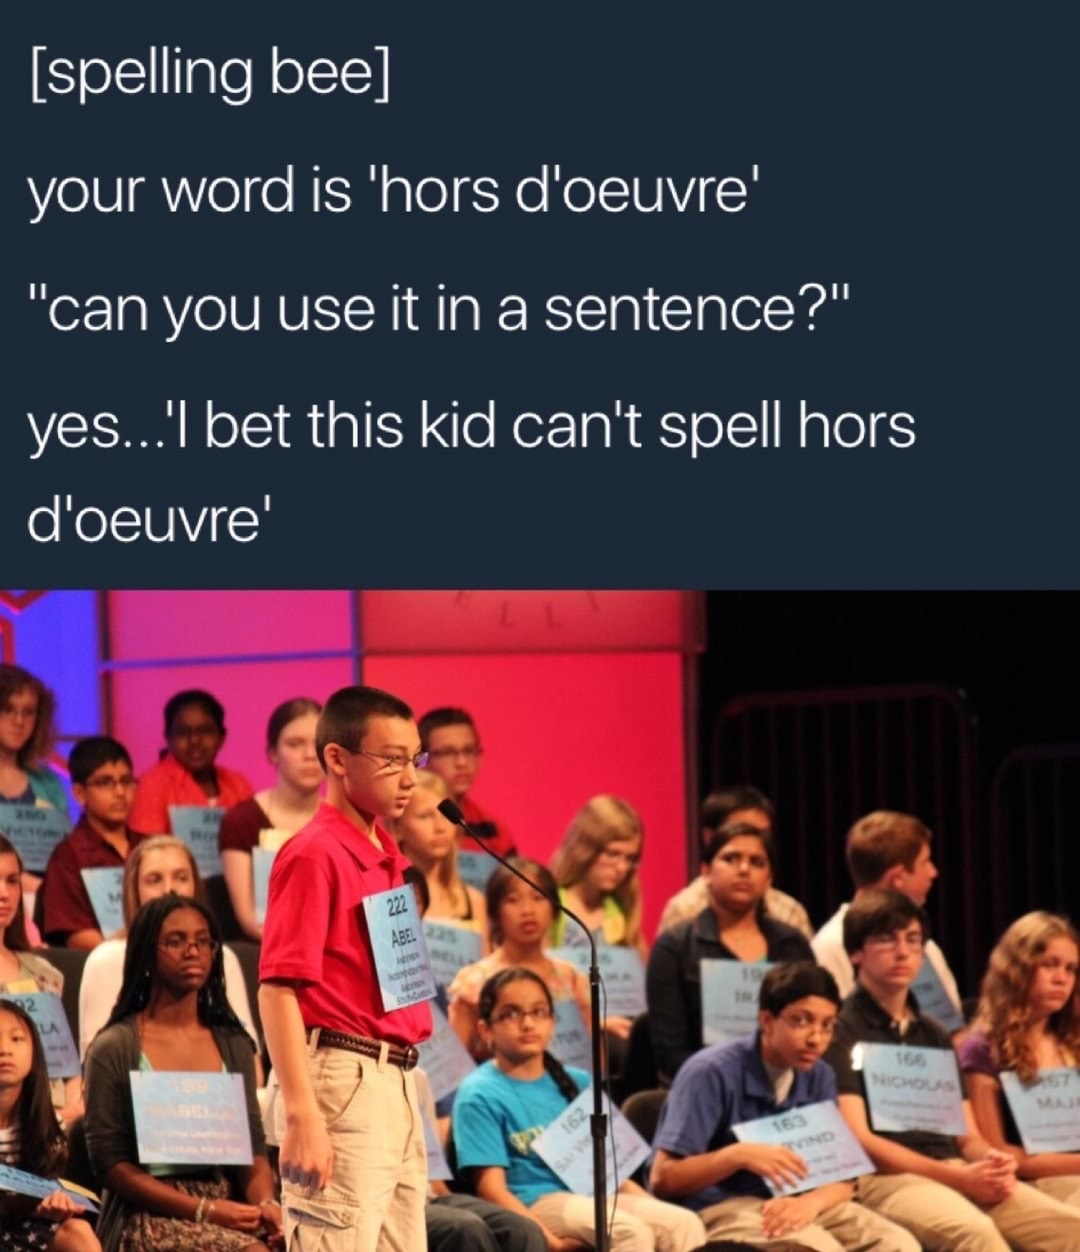 scripps national spelling meme - spelling bee your word is 'hors d'oeuvre' "can you use it in a sentence?" yes... I bet this kid can't spell hors d'oeuvre' No